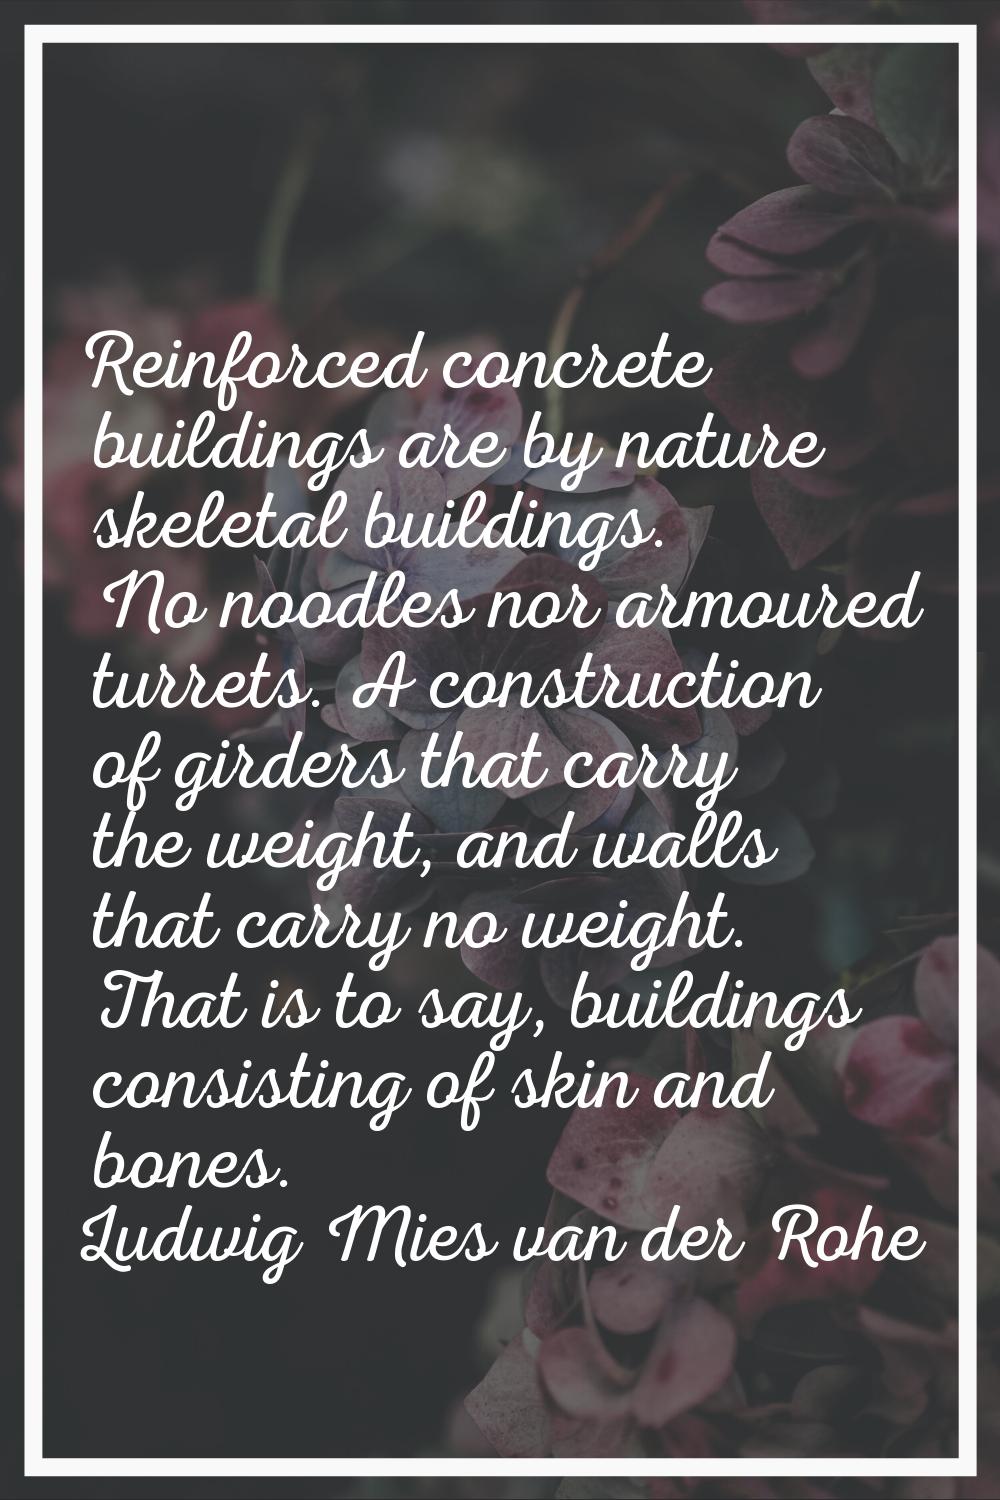 Reinforced concrete buildings are by nature skeletal buildings. No noodles nor armoured turrets. A 